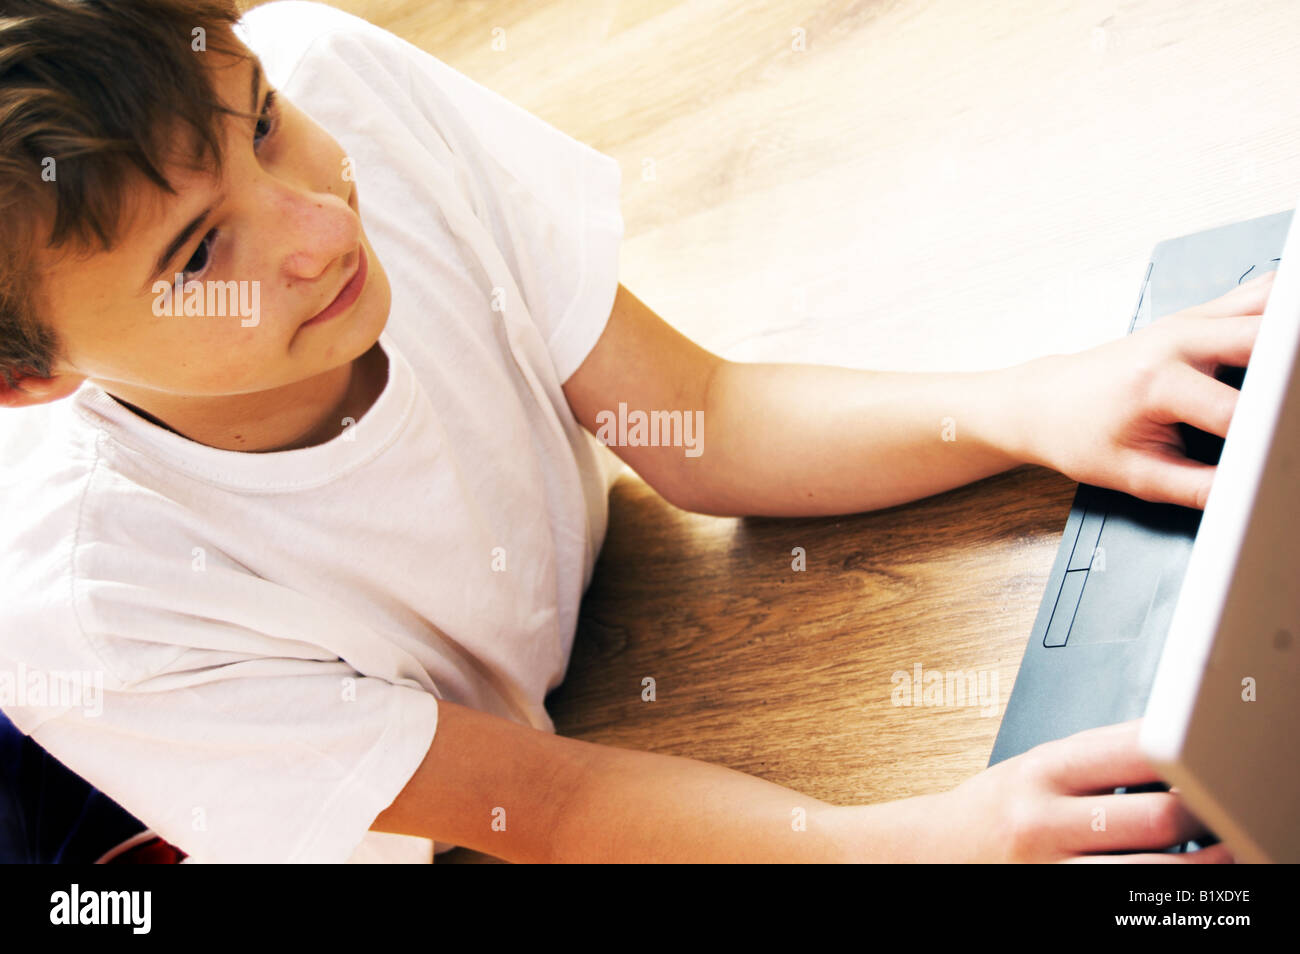 Young boy on laptop Stock Photo